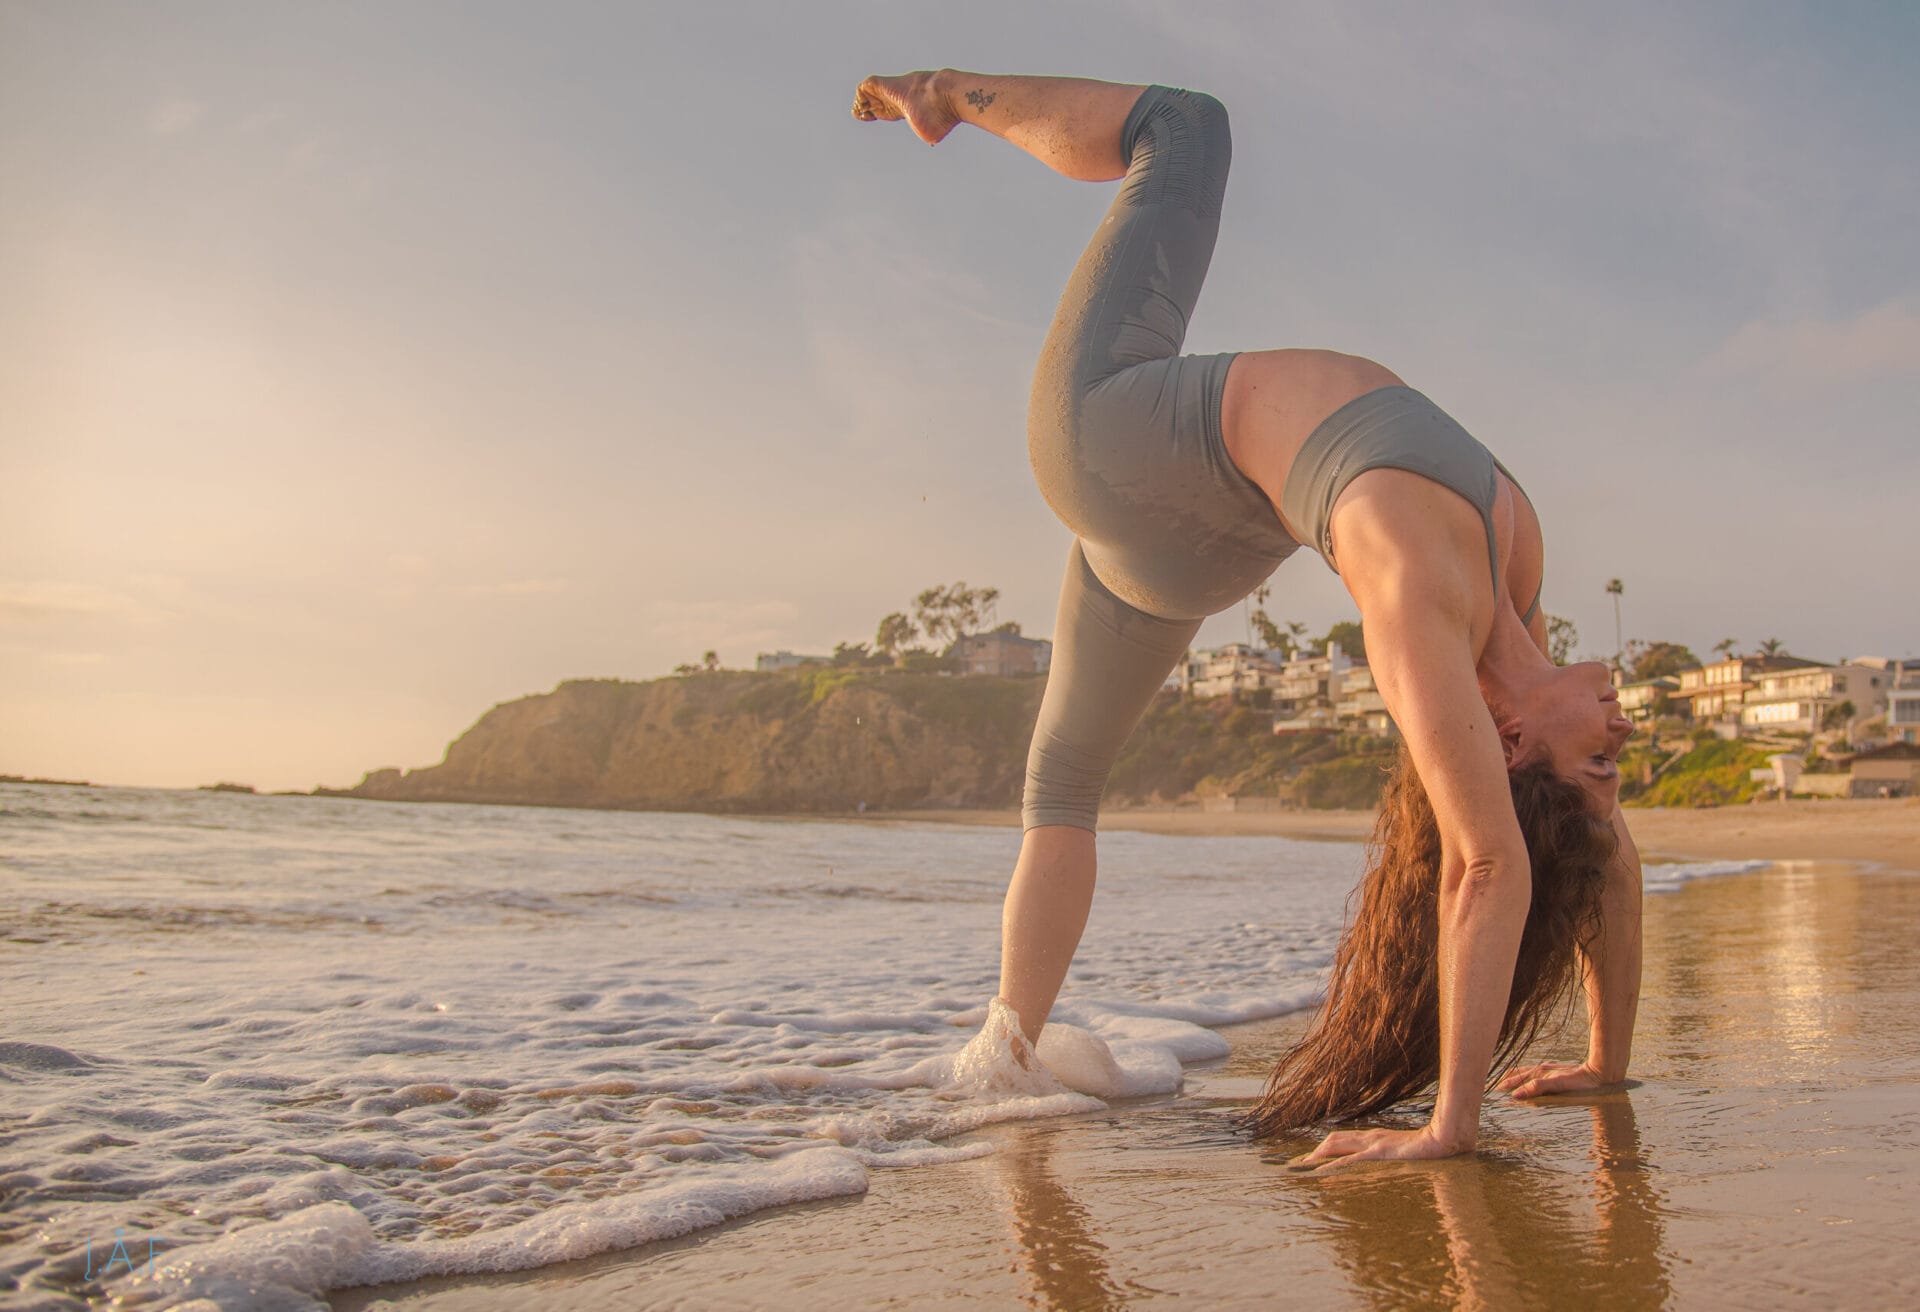 Woman performing a backbend on a beach at sunset.